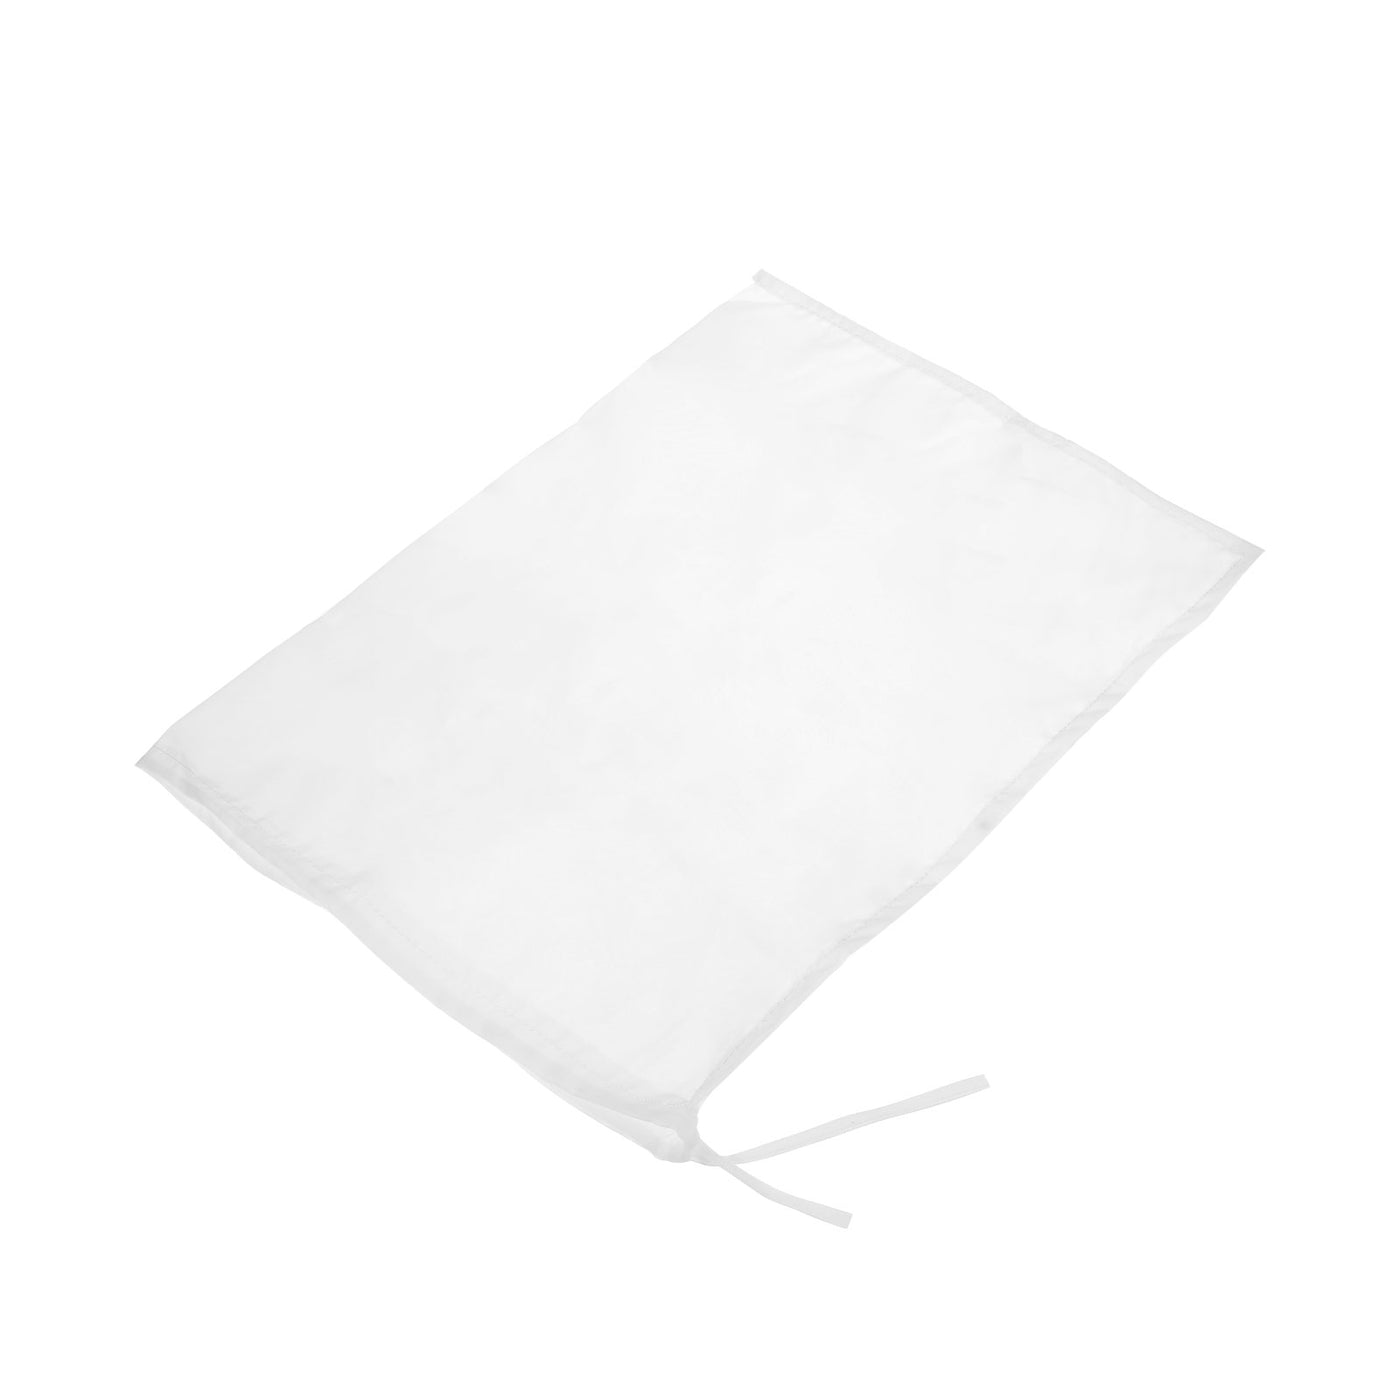 uxcell Uxcell Paint Filter Bag 200 Mesh (17.7"x11.8") Nylon Strainer for Filtering Paint